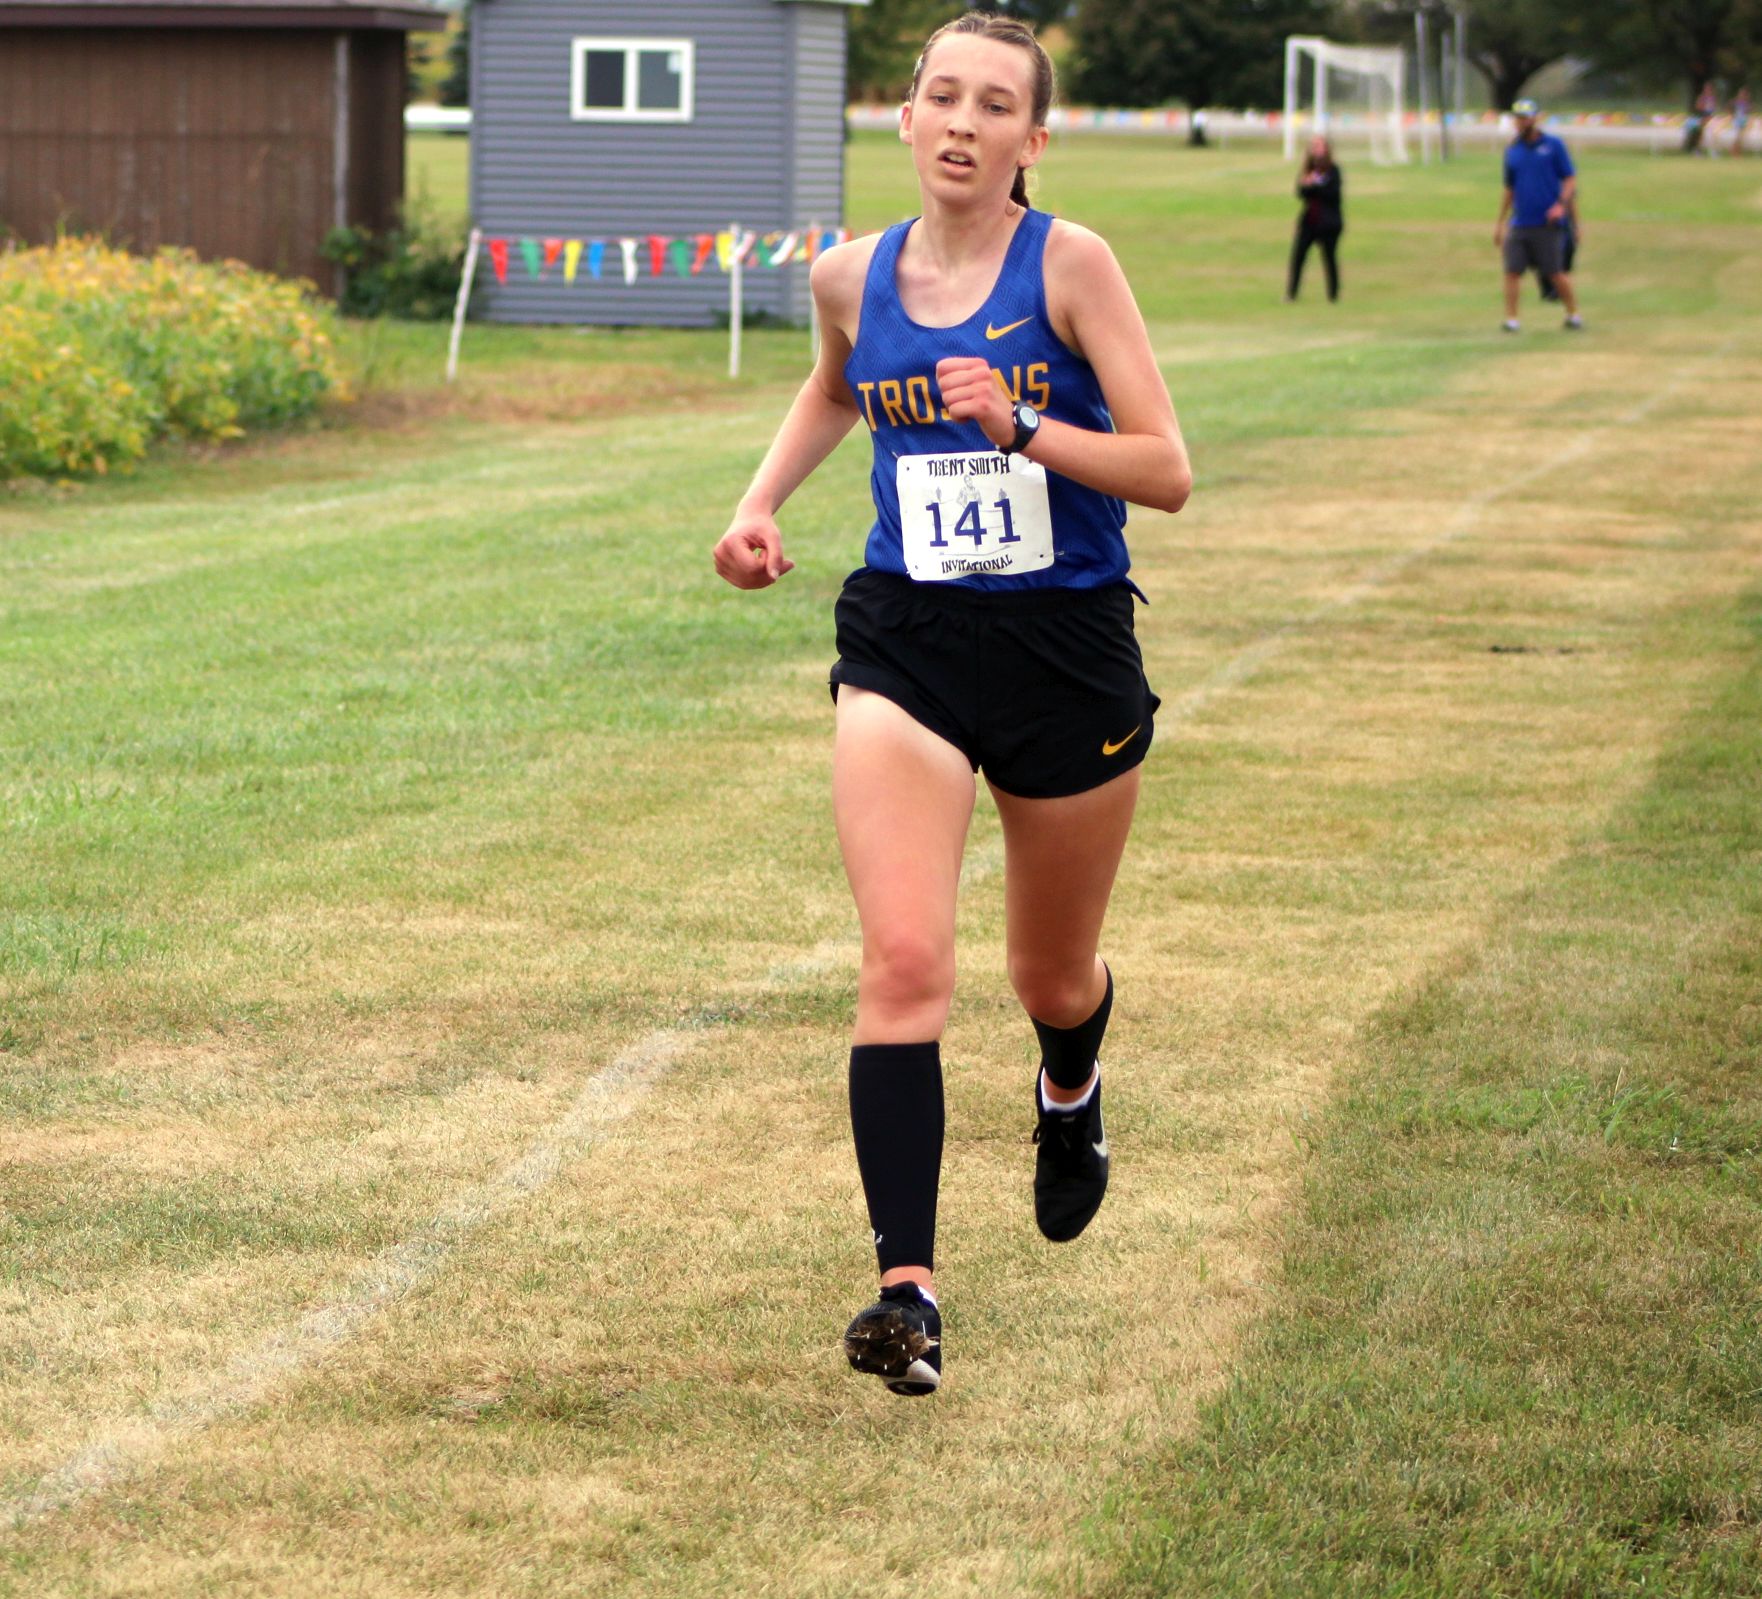 NIACC's Juliana Droll placed fifth at the Trent Smith Invitational on Friday on the NIACC campus.